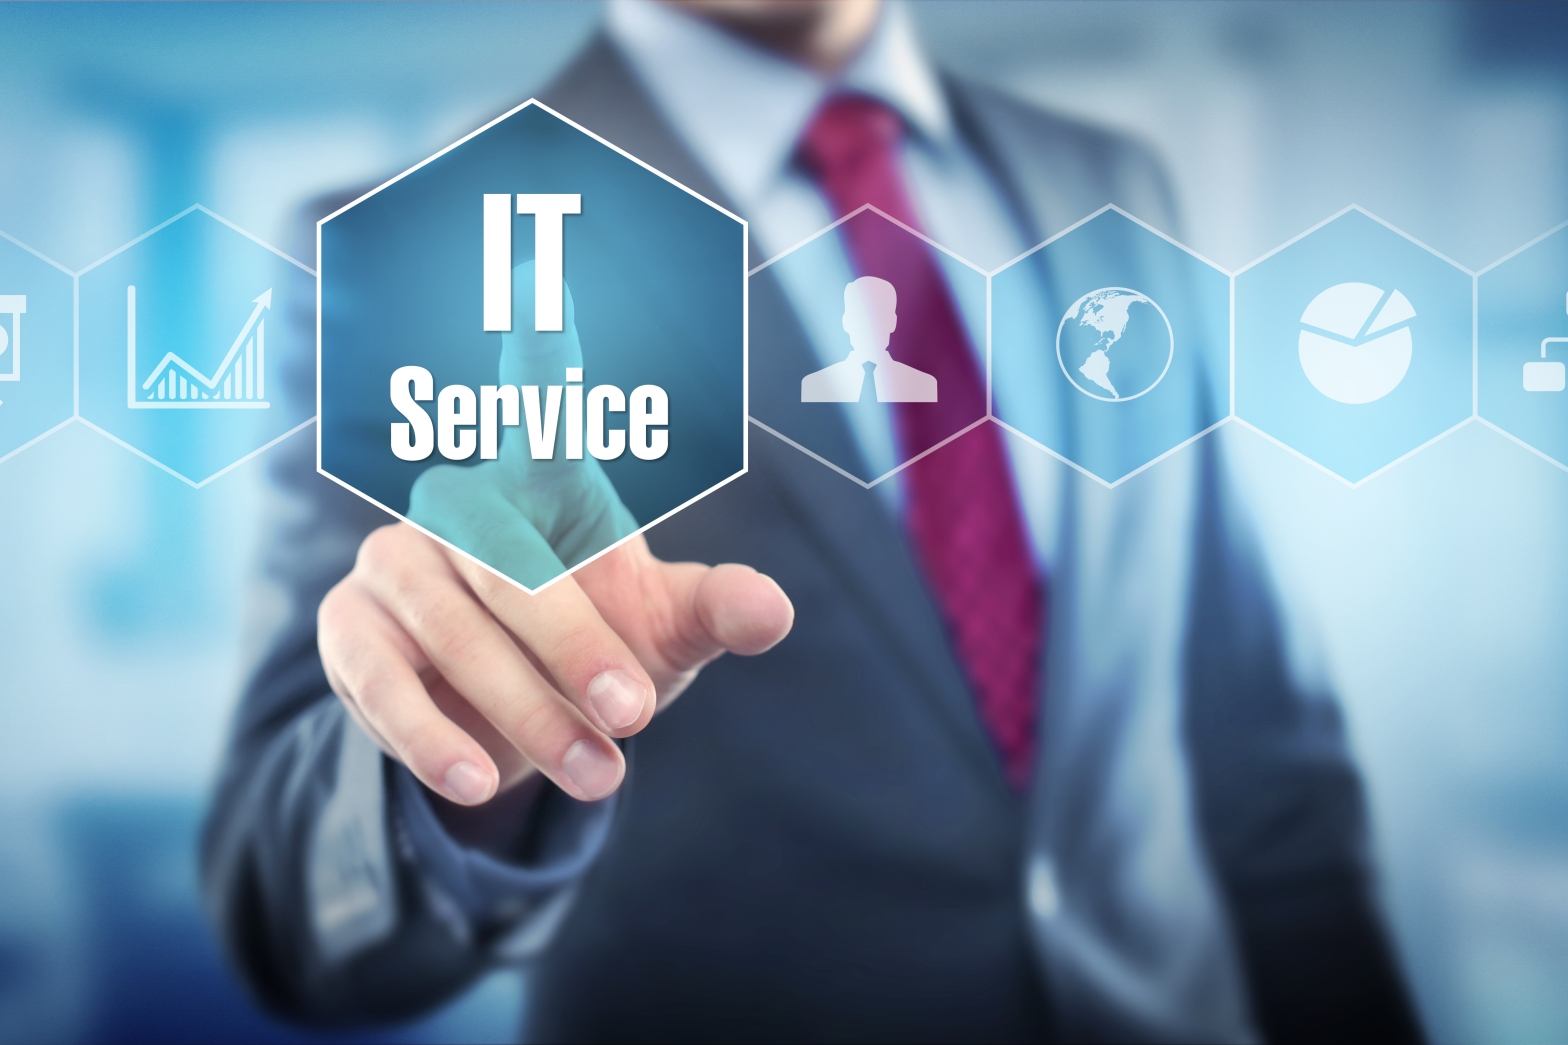 IT Services IT Support Charlotte NC